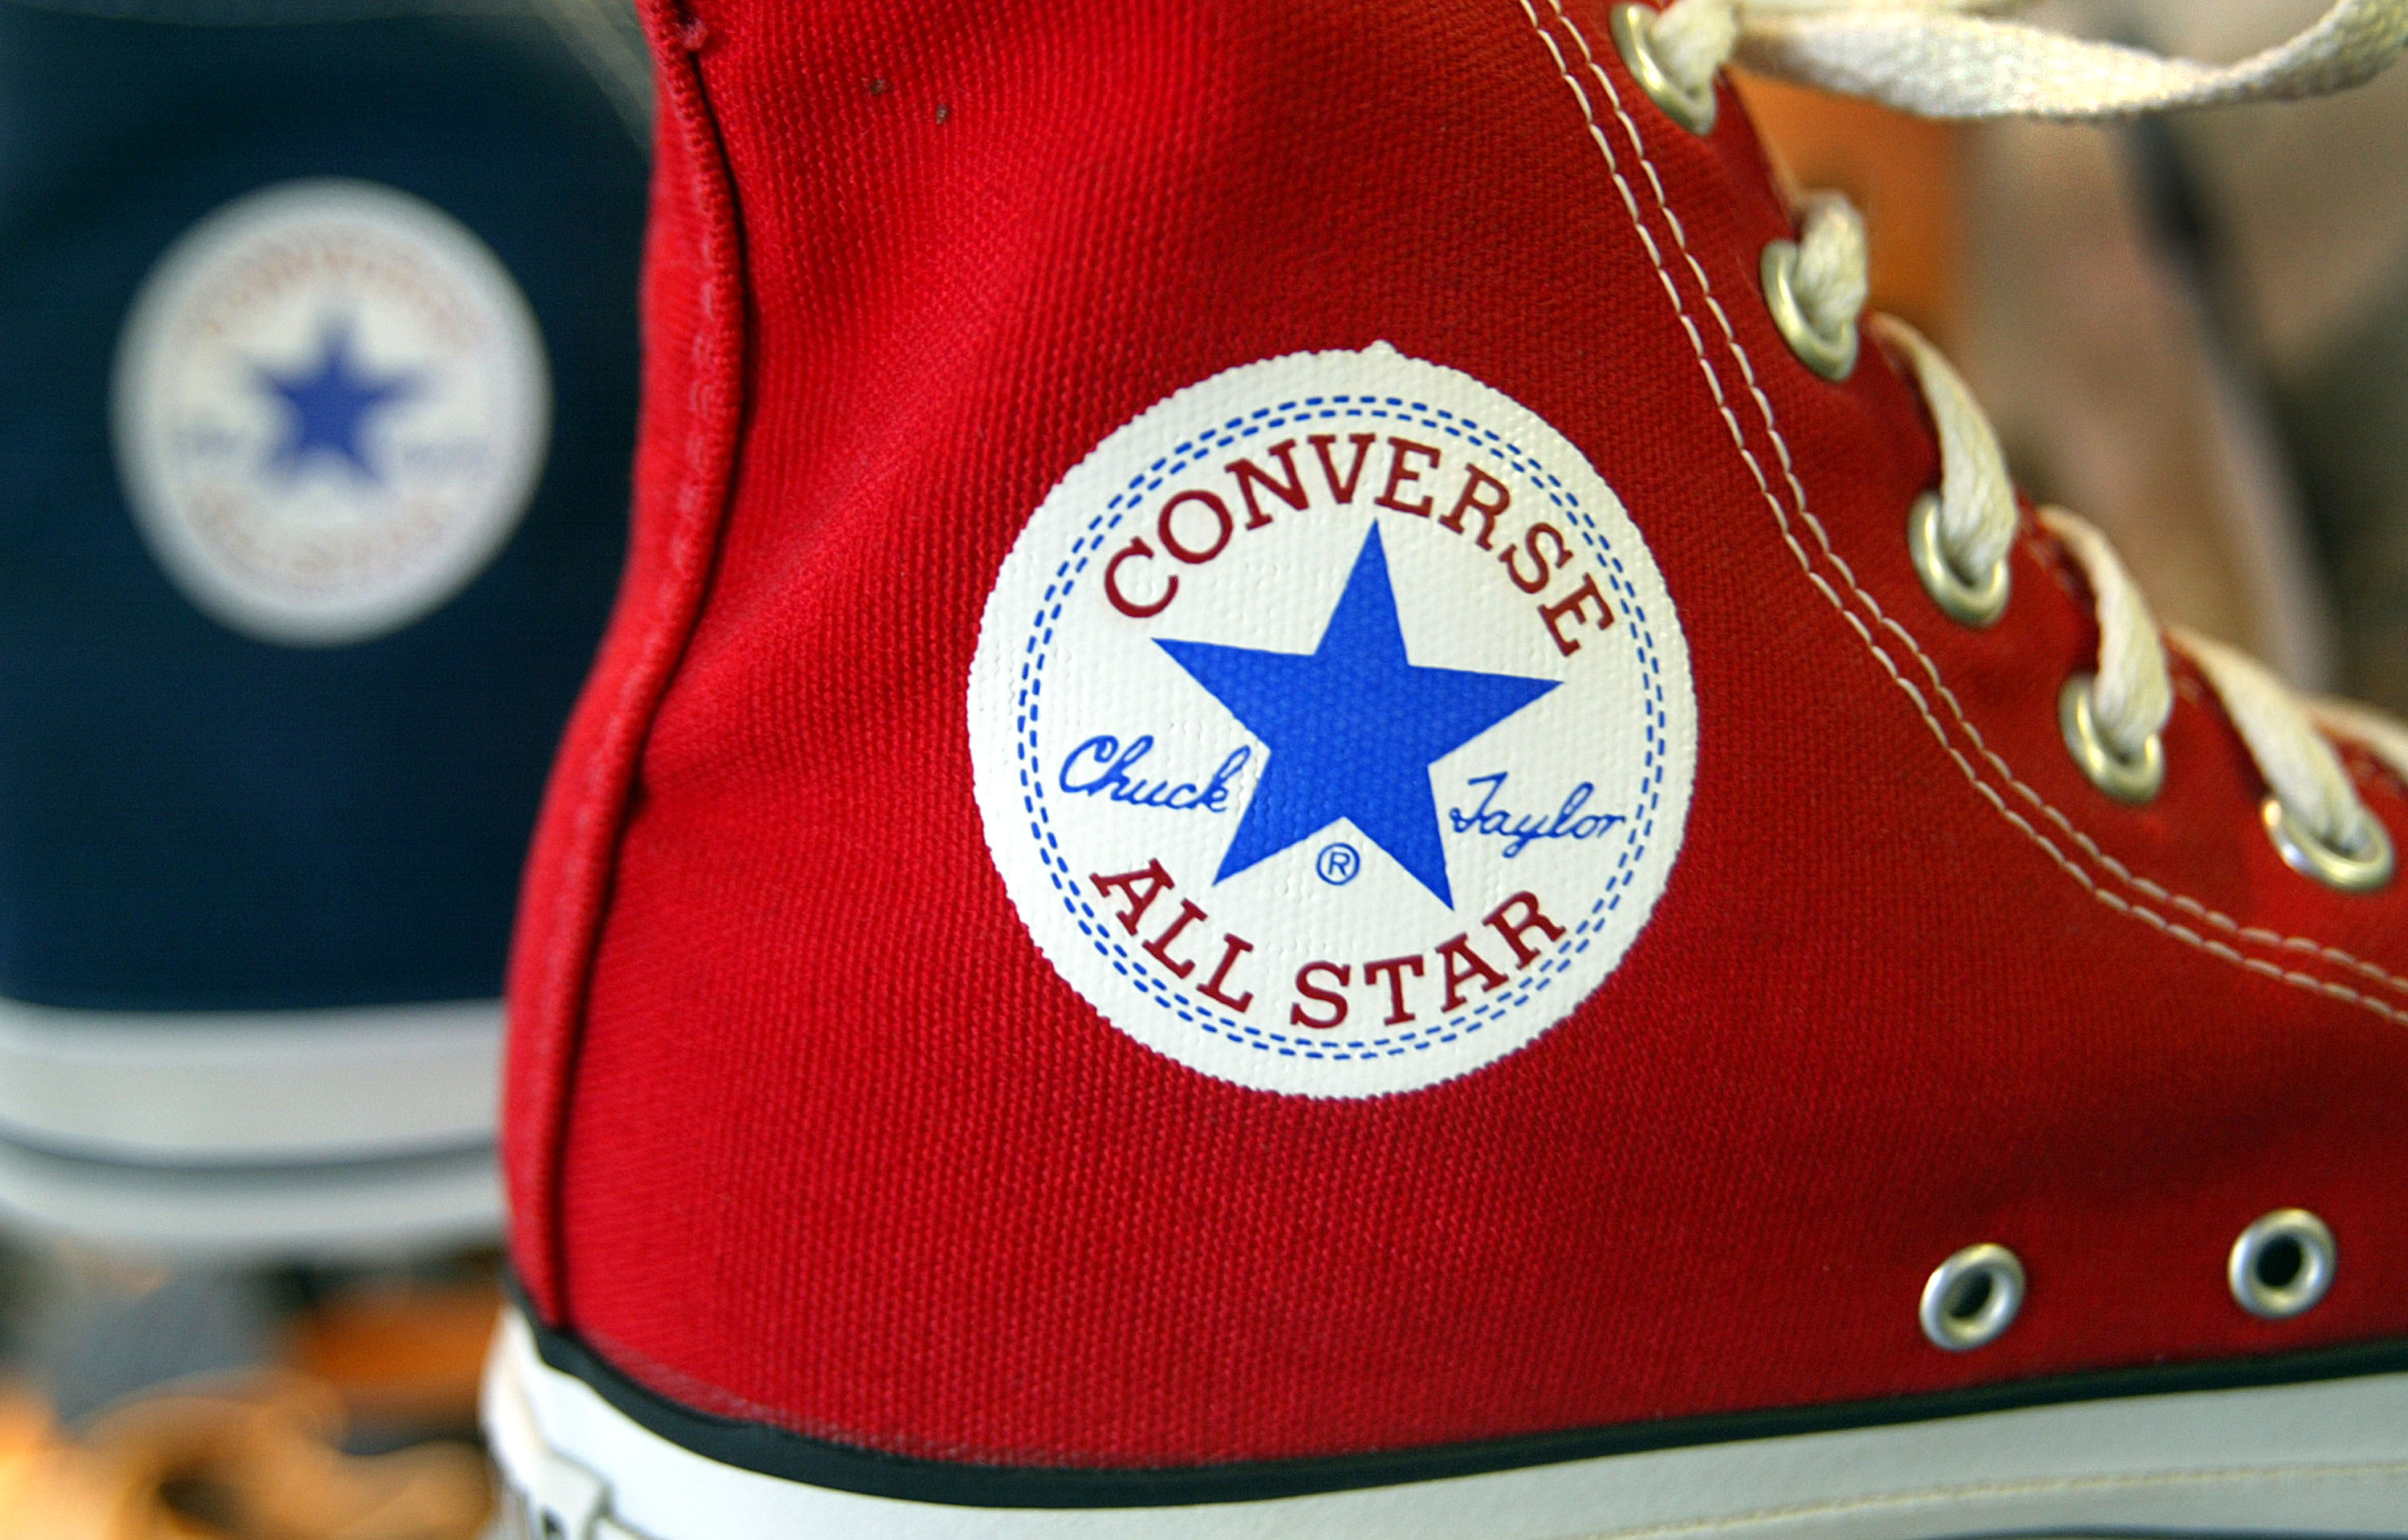 does nike own converse